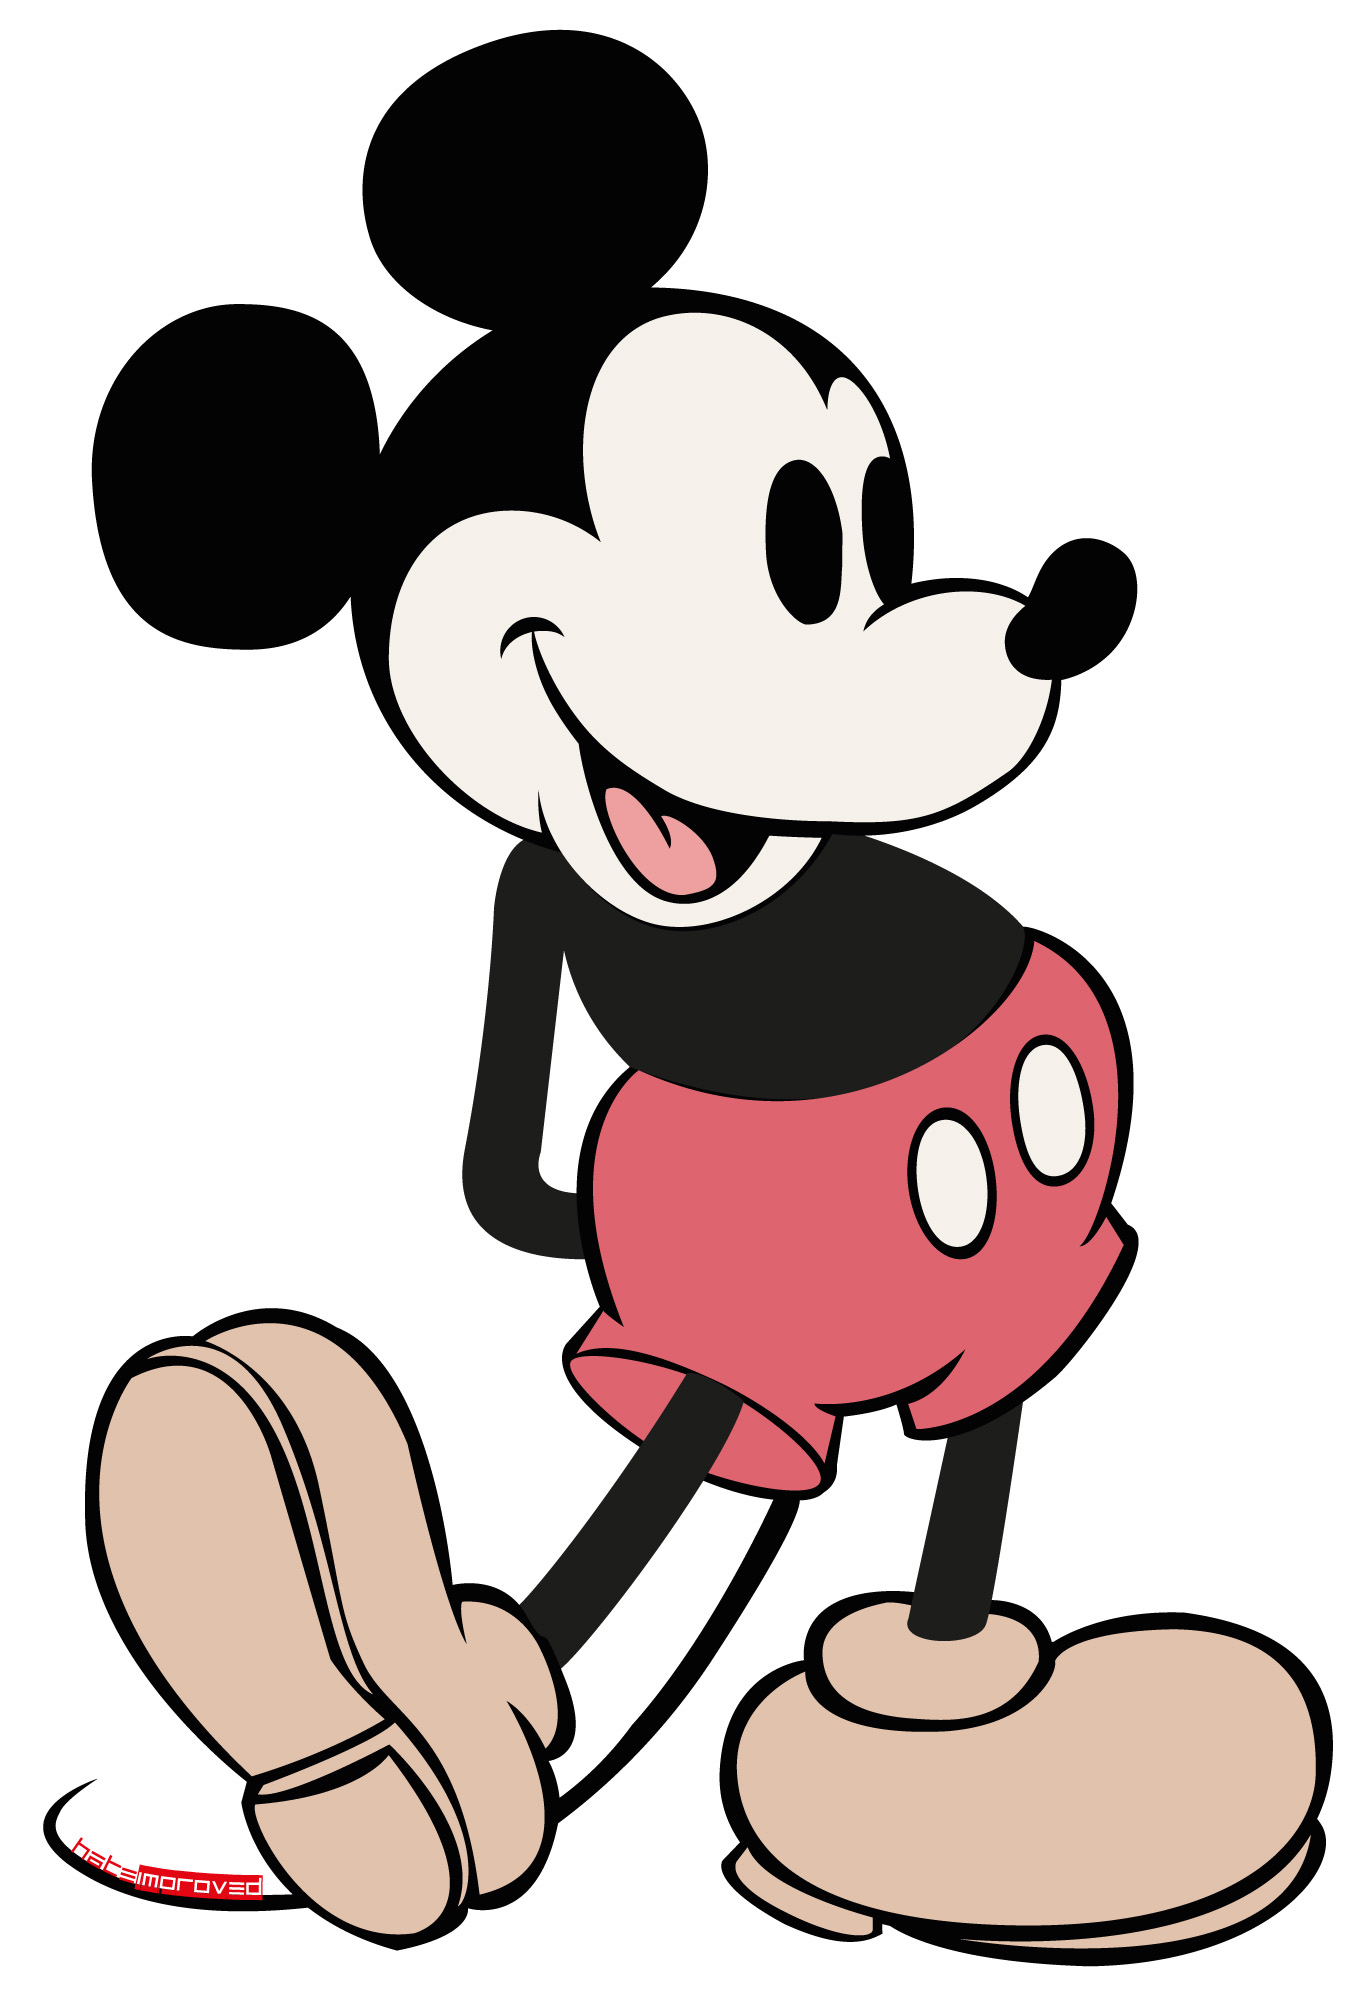 mickey mouse thumbs up clipart - photo #36